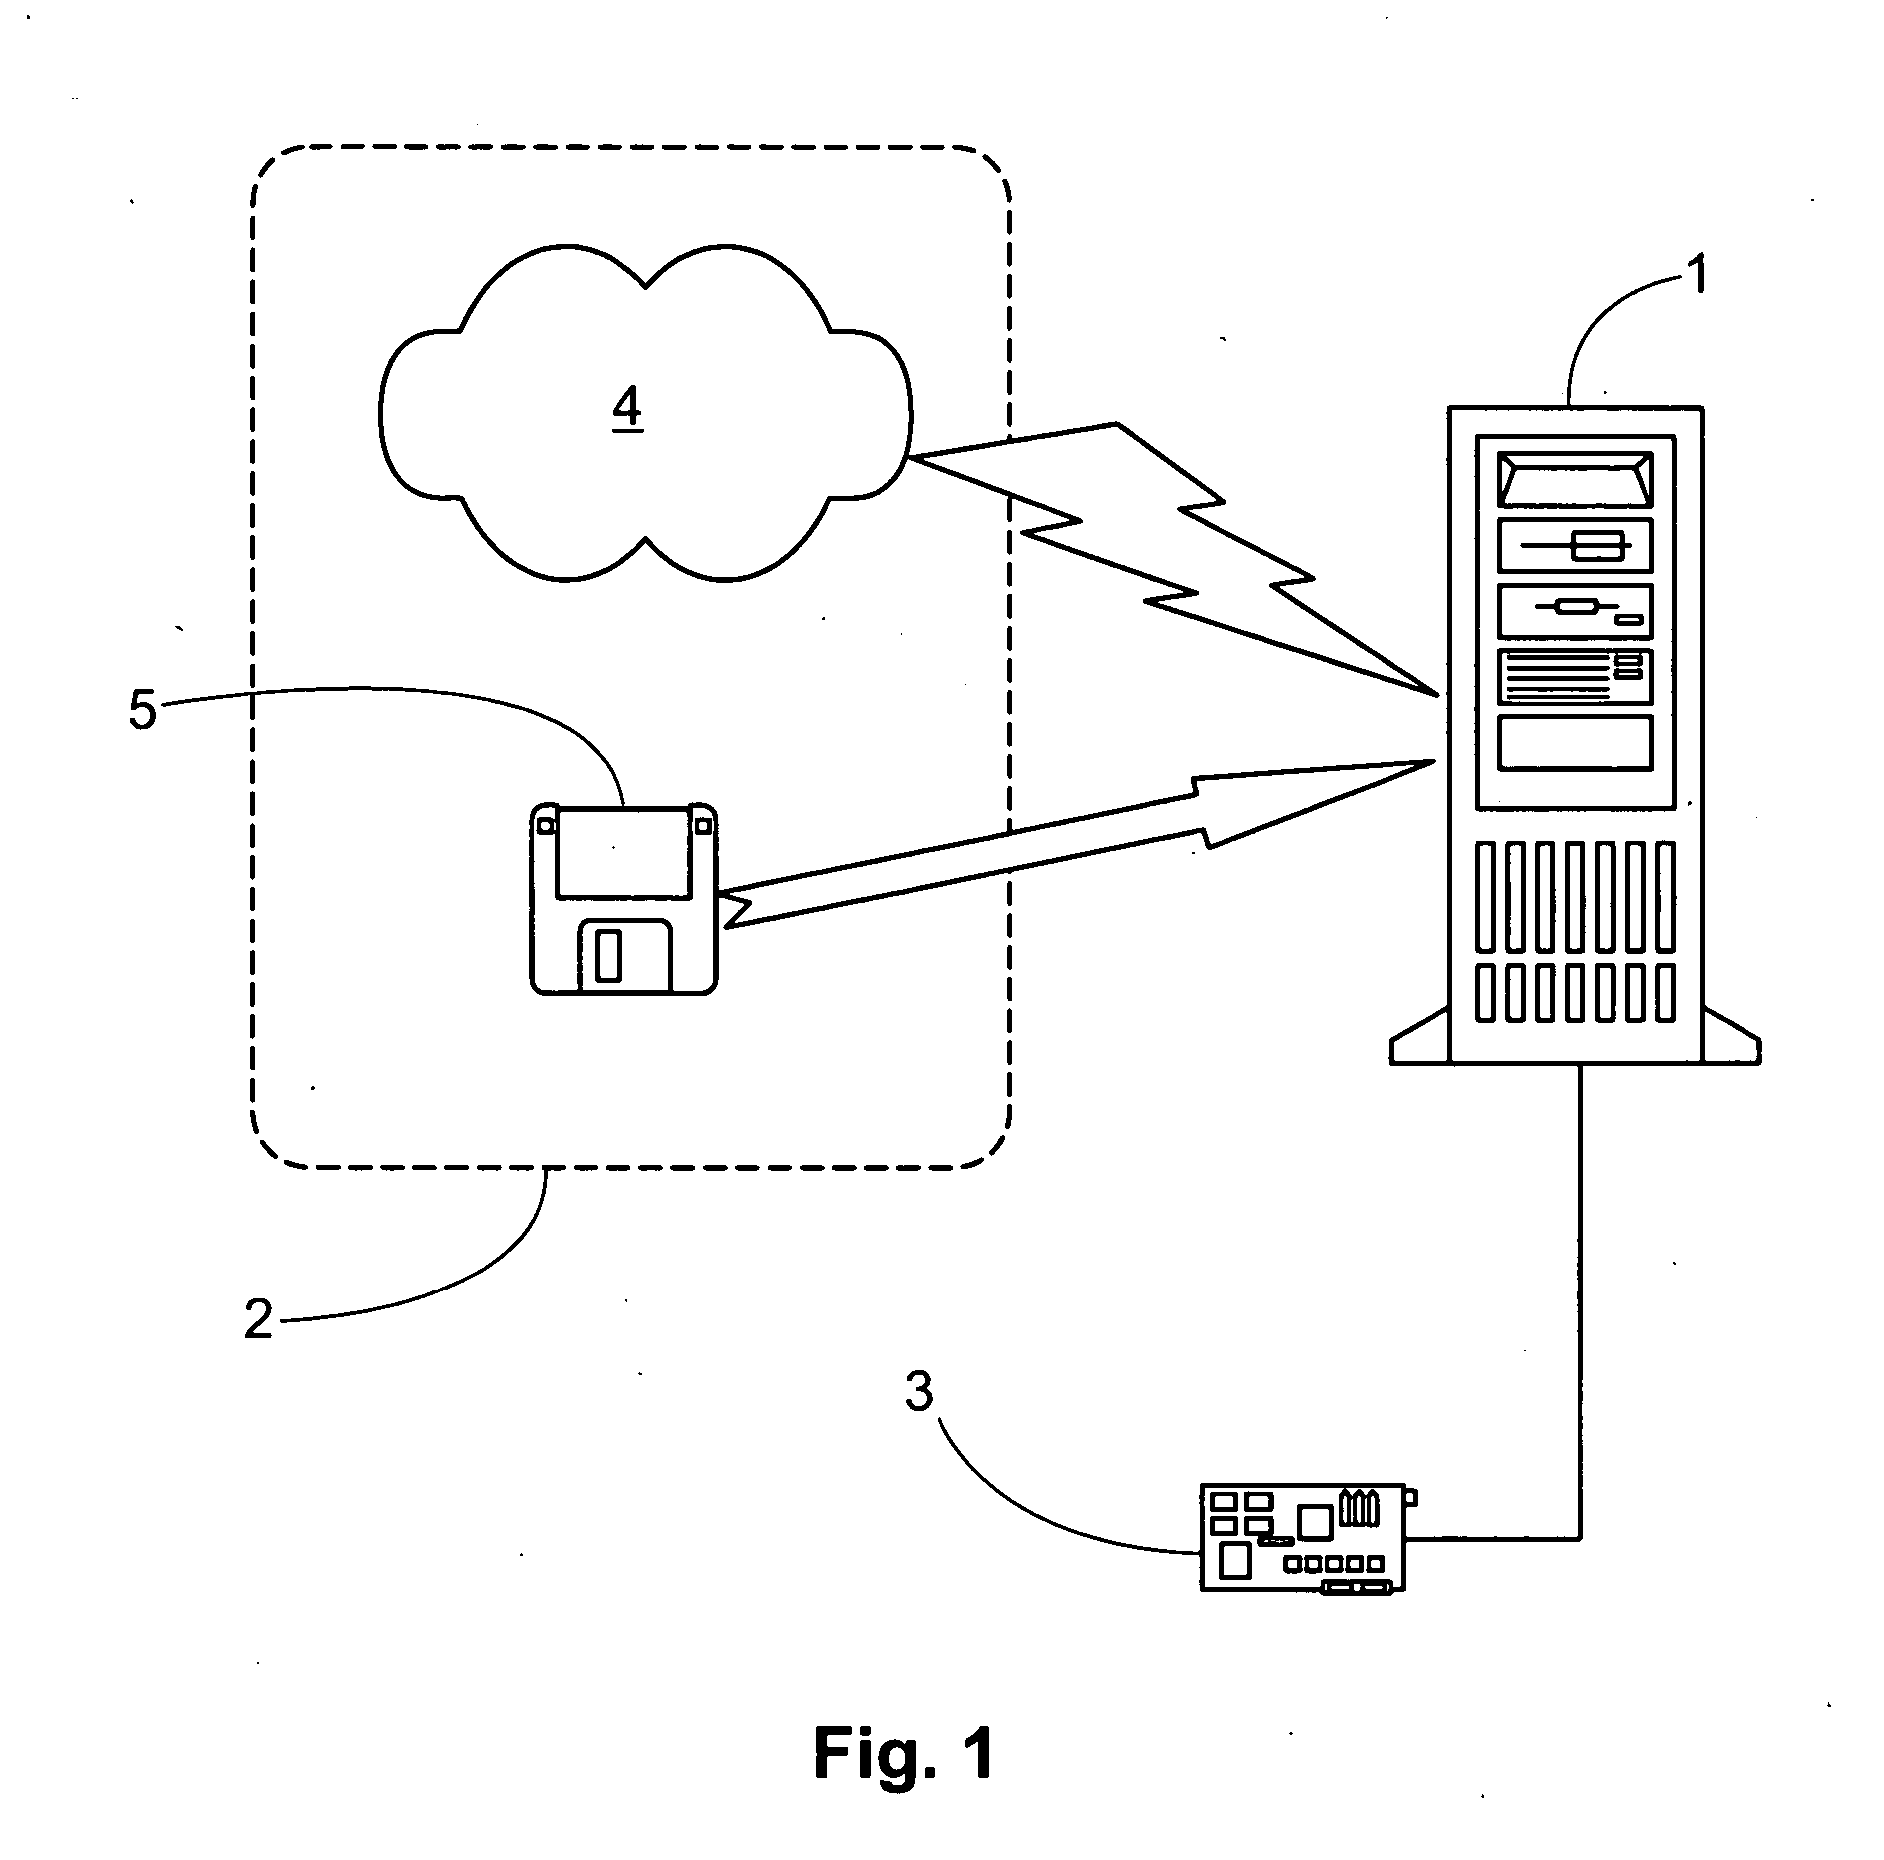 Software protection system and method